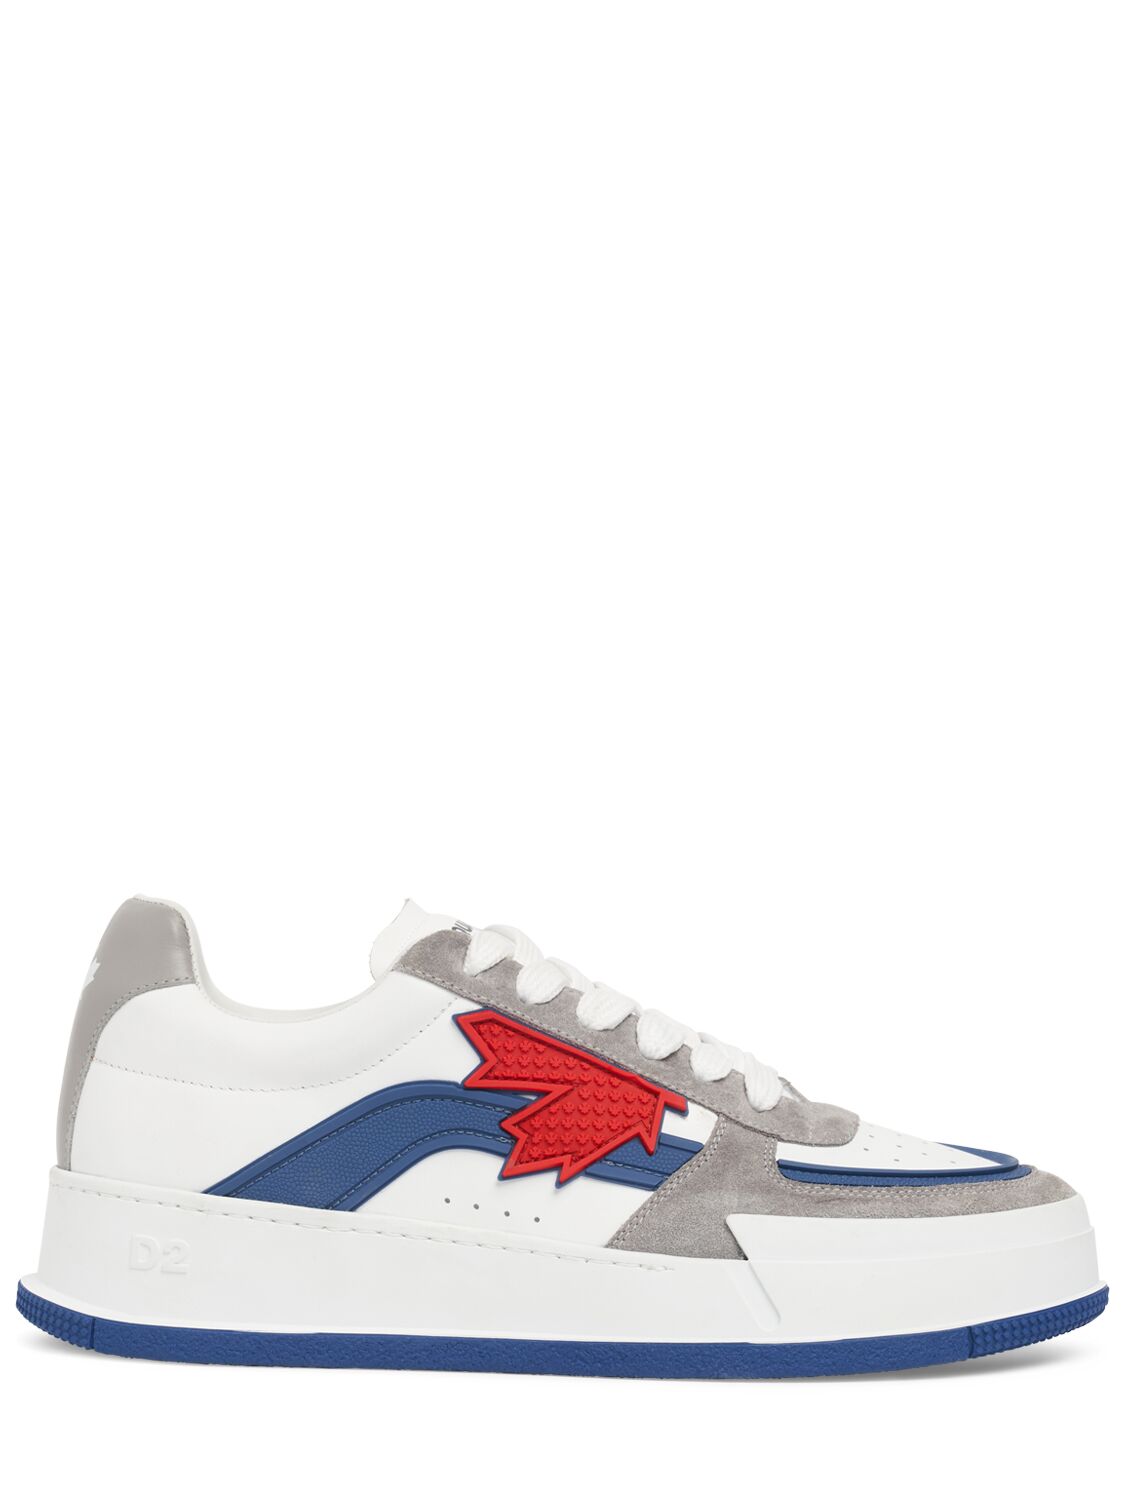 Dsquared2 Logo Leather Sneakers In White,blue